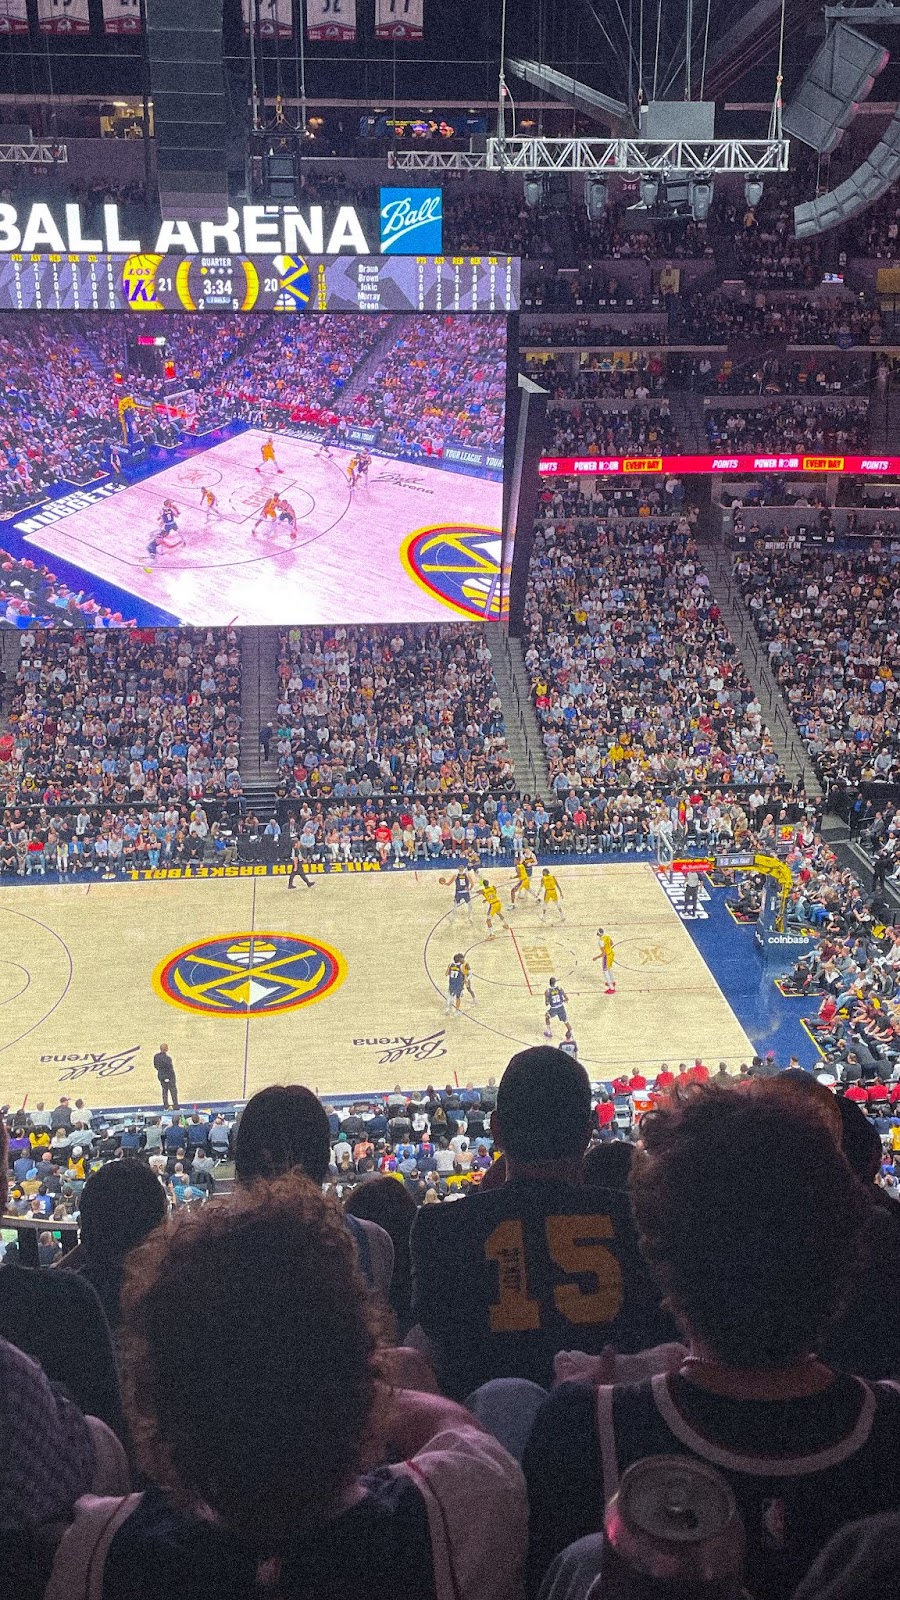 Emma's view of Game 2 of the Nuggets vs. Lakers playoff series.